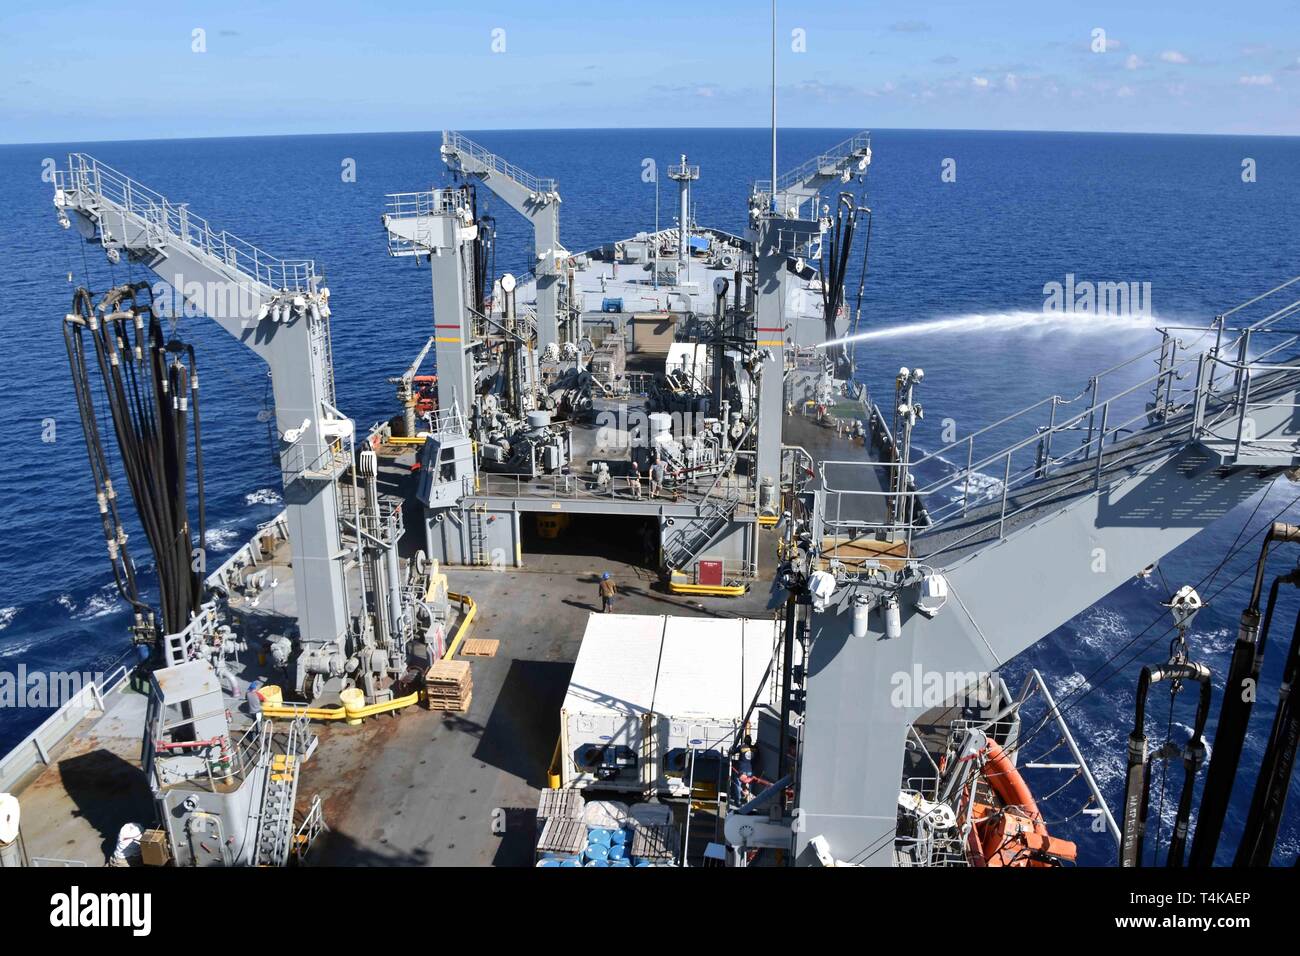 190416-N-WF604-012 INDIAN OCEAN (April 16, 2019) -- Civilian mariners onboard fleet replenishment oiler USNS Guadalupe (T-AO 200) perform testing of the ship's Foam Fire Monitoring System April 16. Military Sealift Command fleet replenishment oilers provide fuel and dry cargo support to customers via underway and vertical replenishments. (Photo by David Wyscaver) Stock Photo